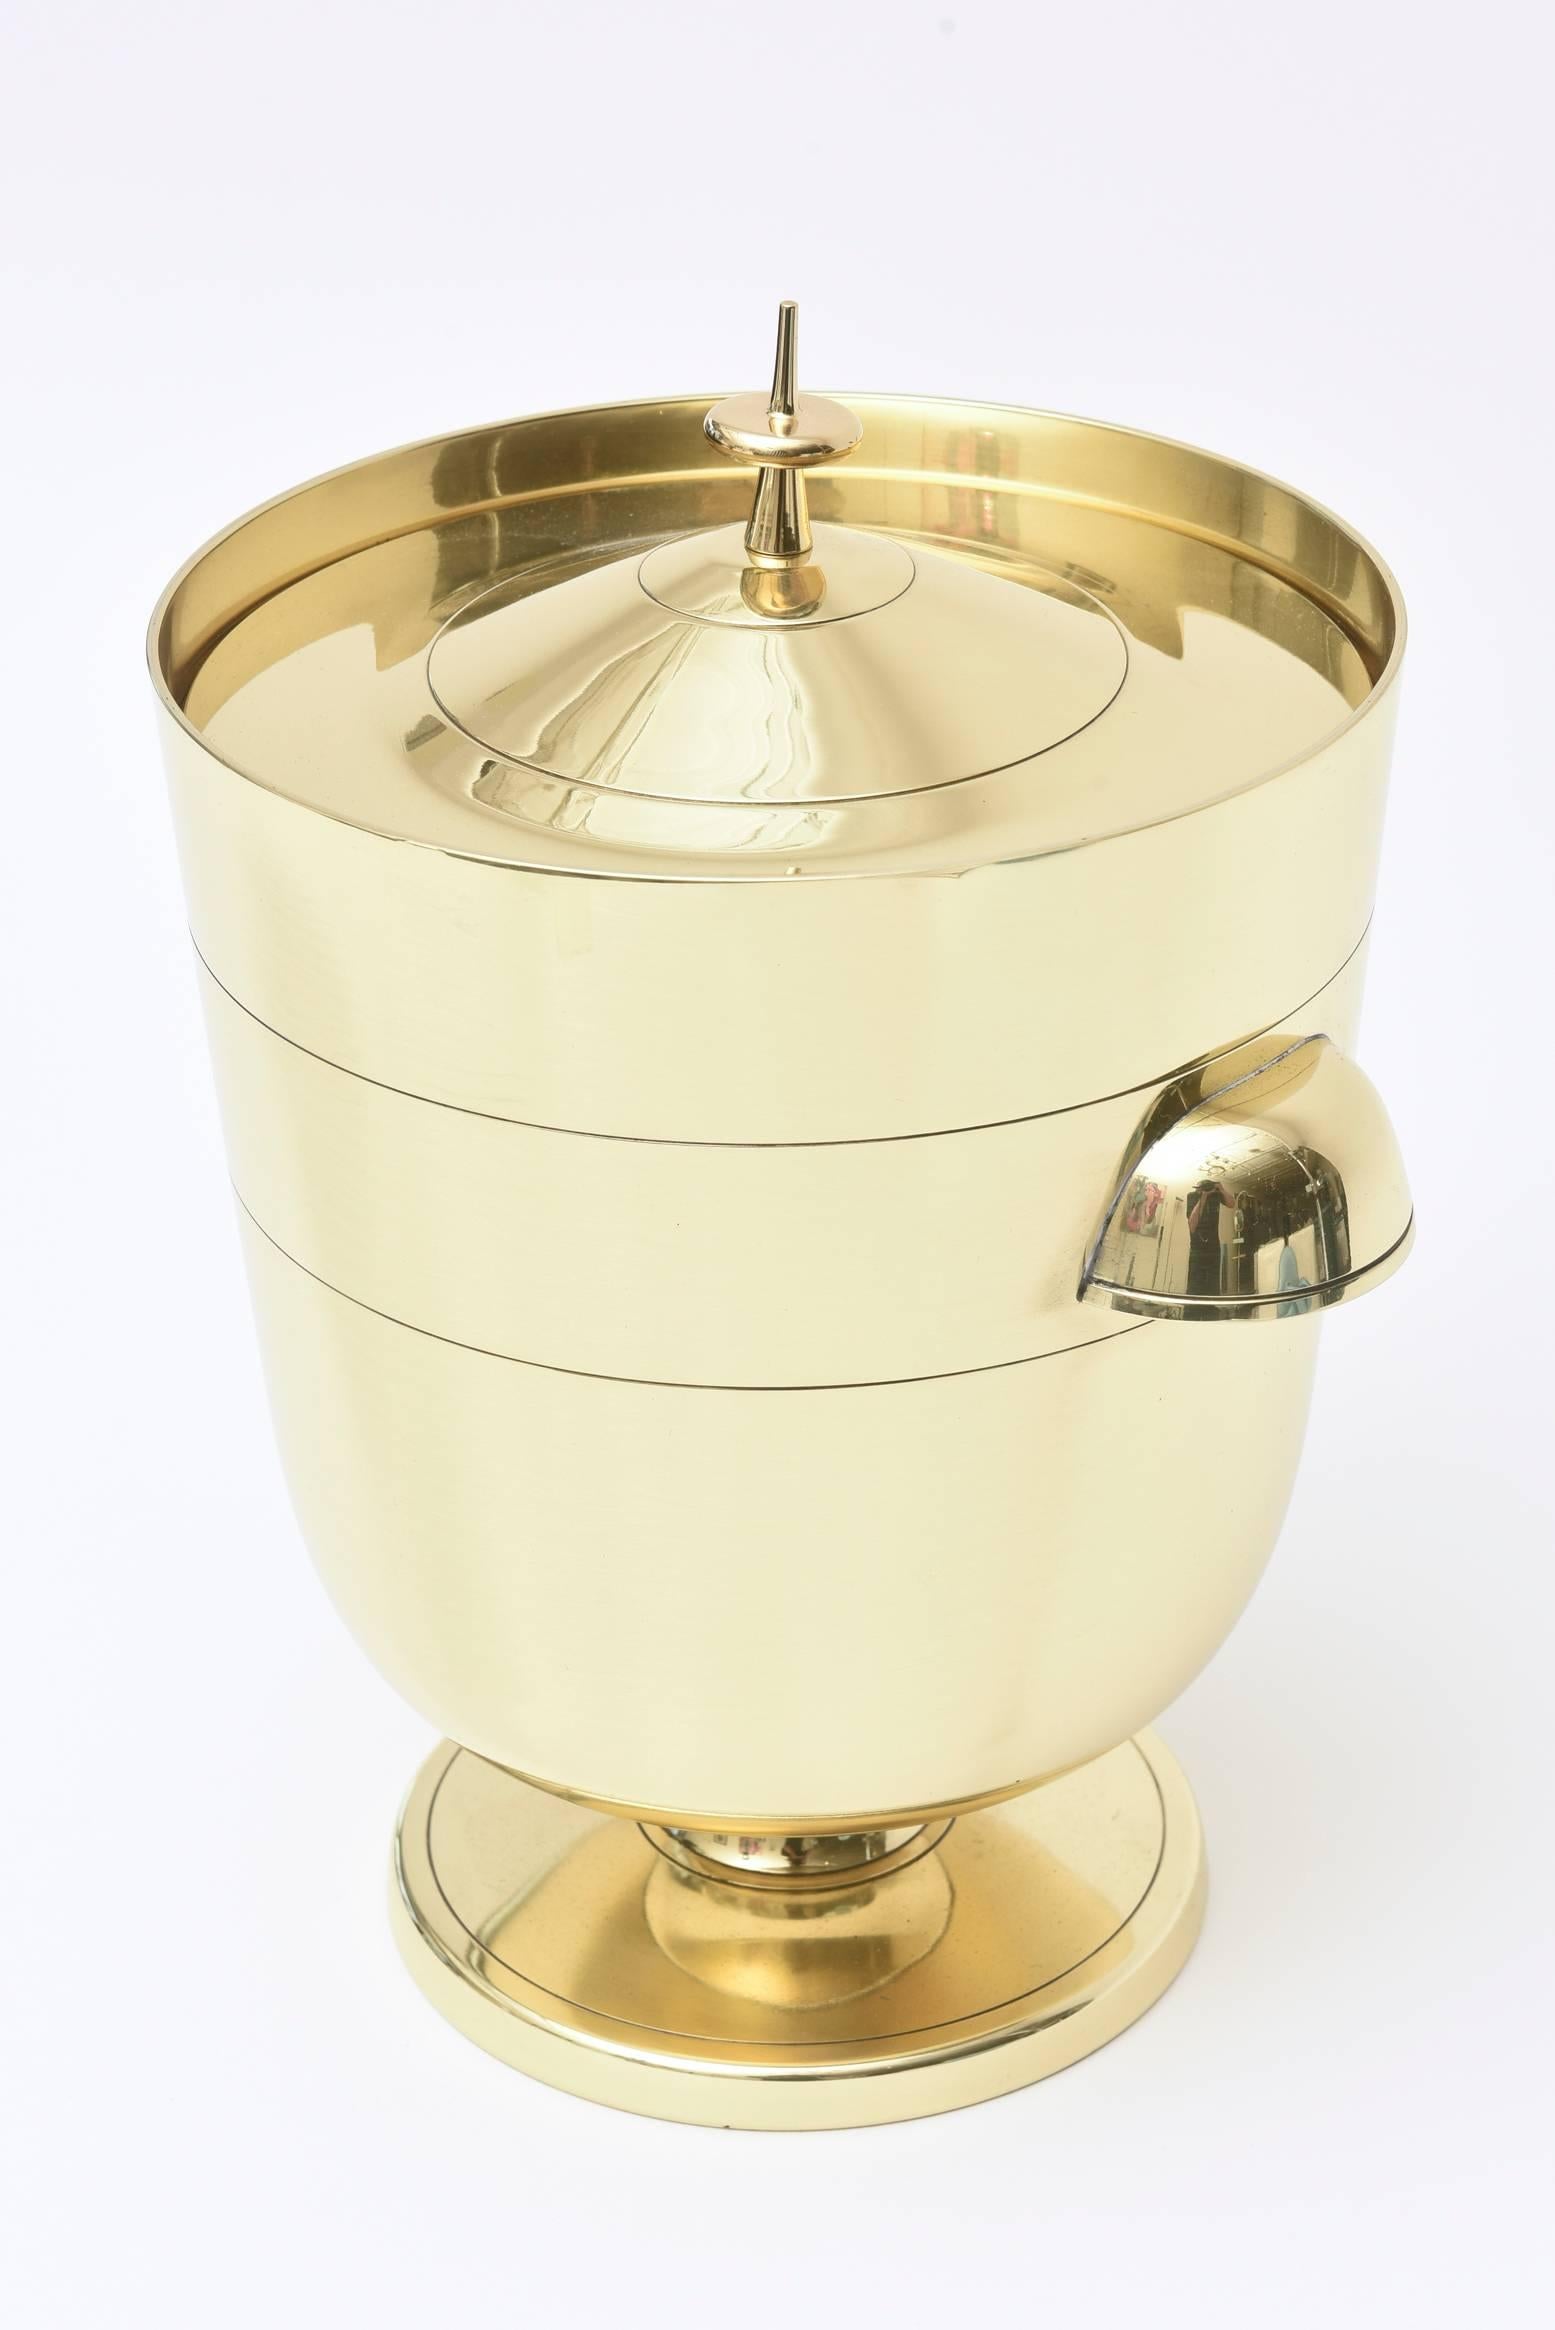 This Classic modernist Mid-Century Modern and solid brass hallmarked Tommi Parzinger for Dorlyn ice bucket and or champagne cooler is always timeless with its form and lines. It has the original mercury silver glass liner. This is great barware and